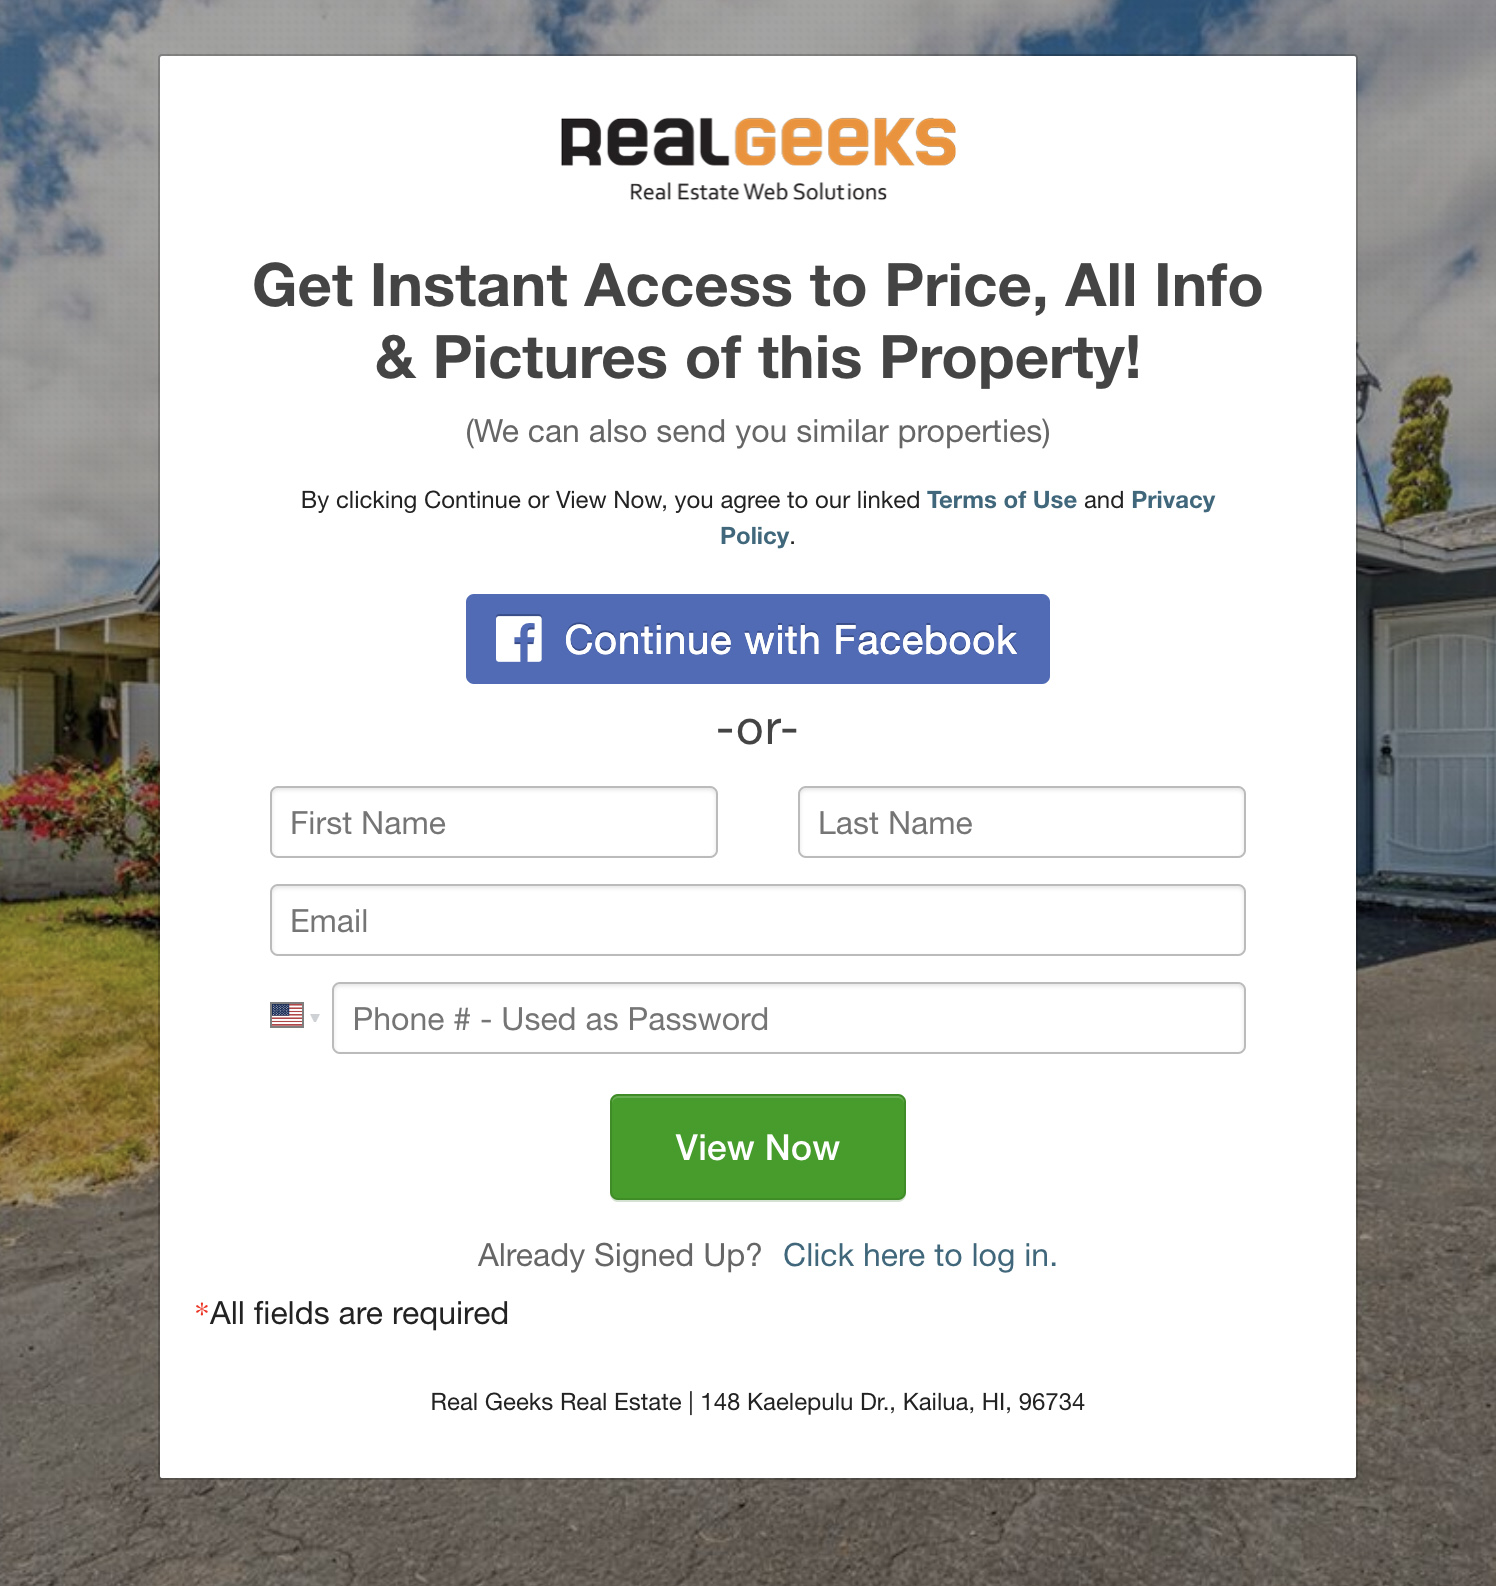 Example of Real Geeks property landing page with lead capture form.